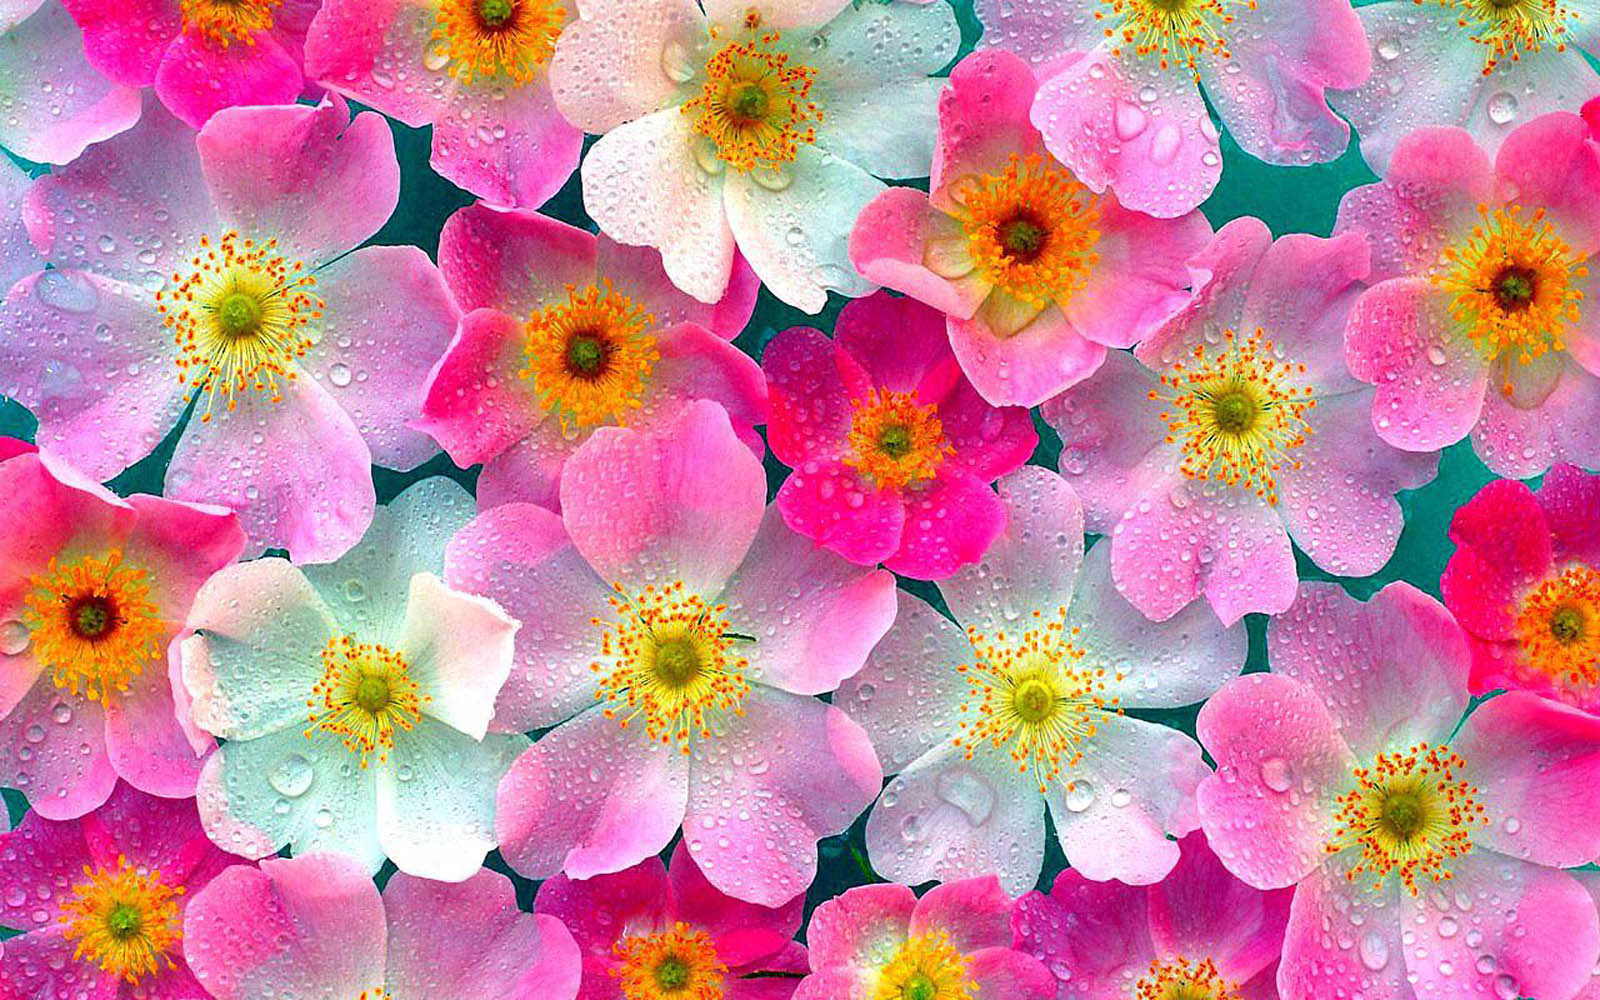 indian-flowers-images-and-wallpapers-27.